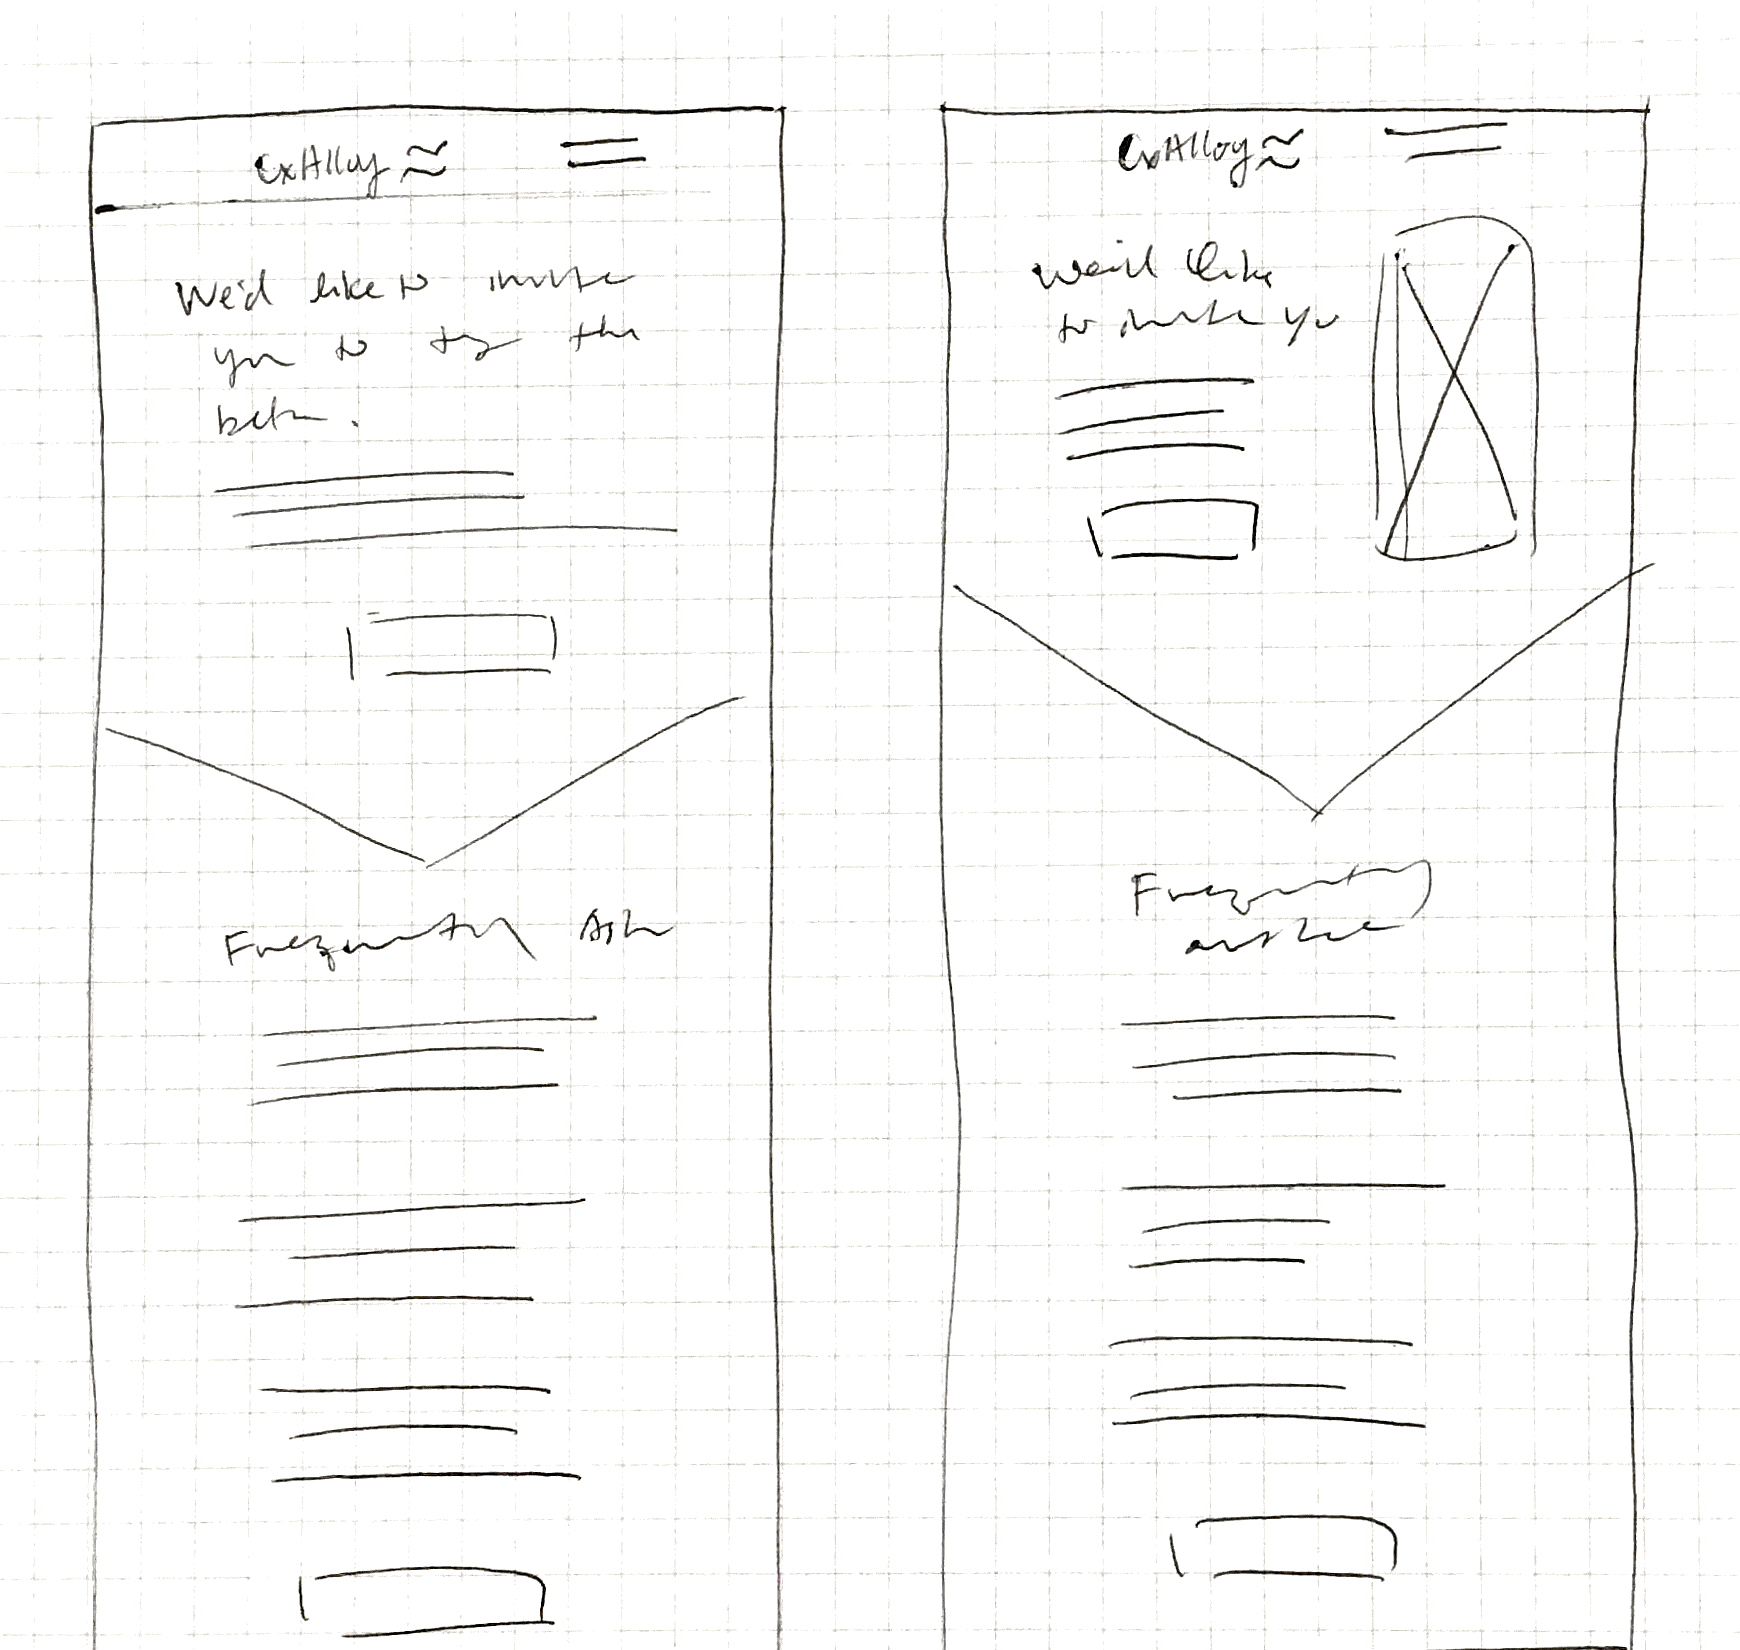 Sketches for new email template.